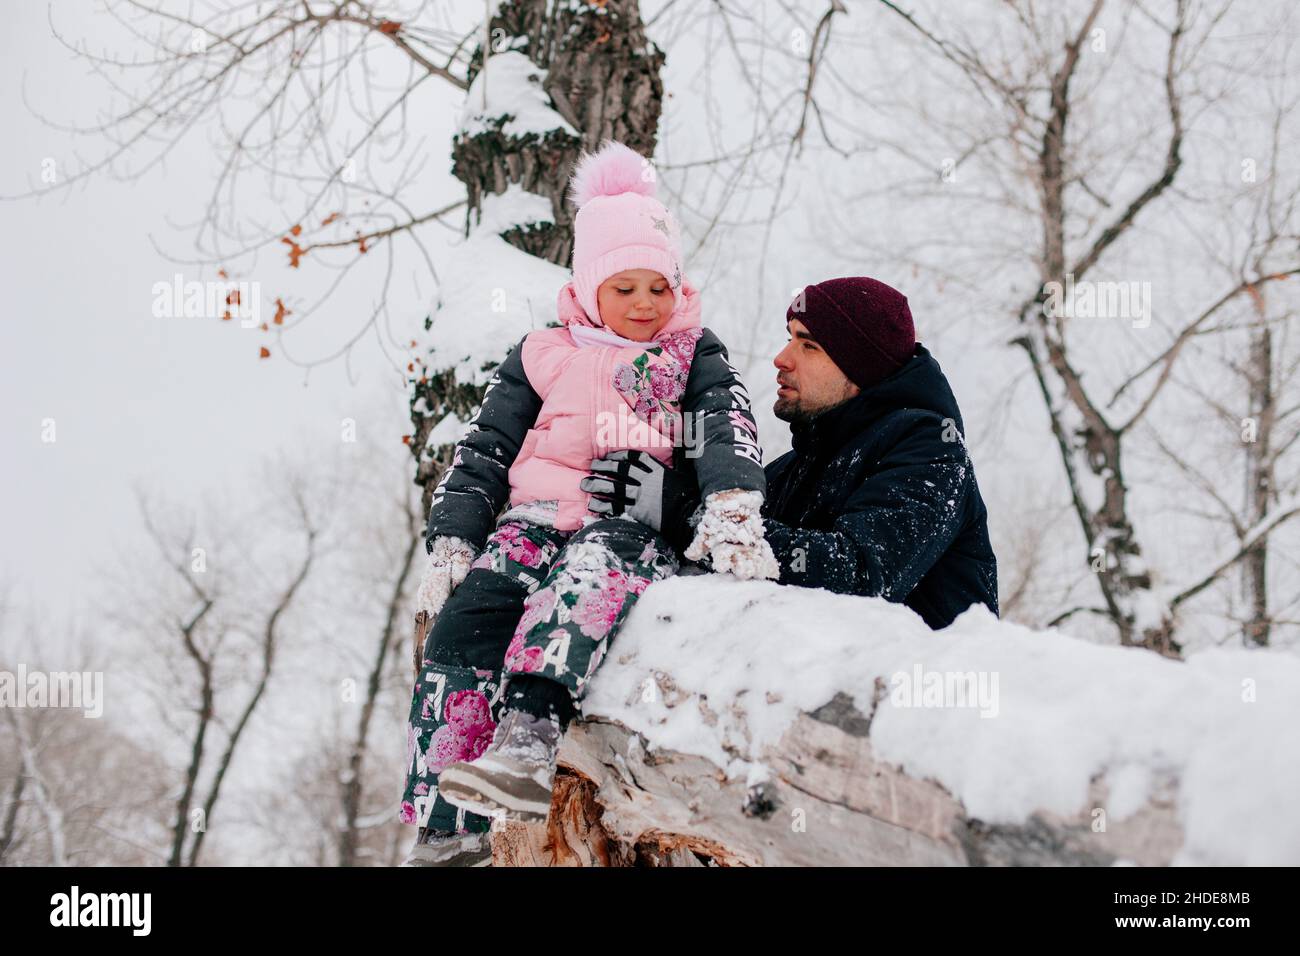 Distant photo of female kid sitting on tree log and smiling wearing pink winter clothes with father holding daughter in forest. Astonishing background Stock Photo